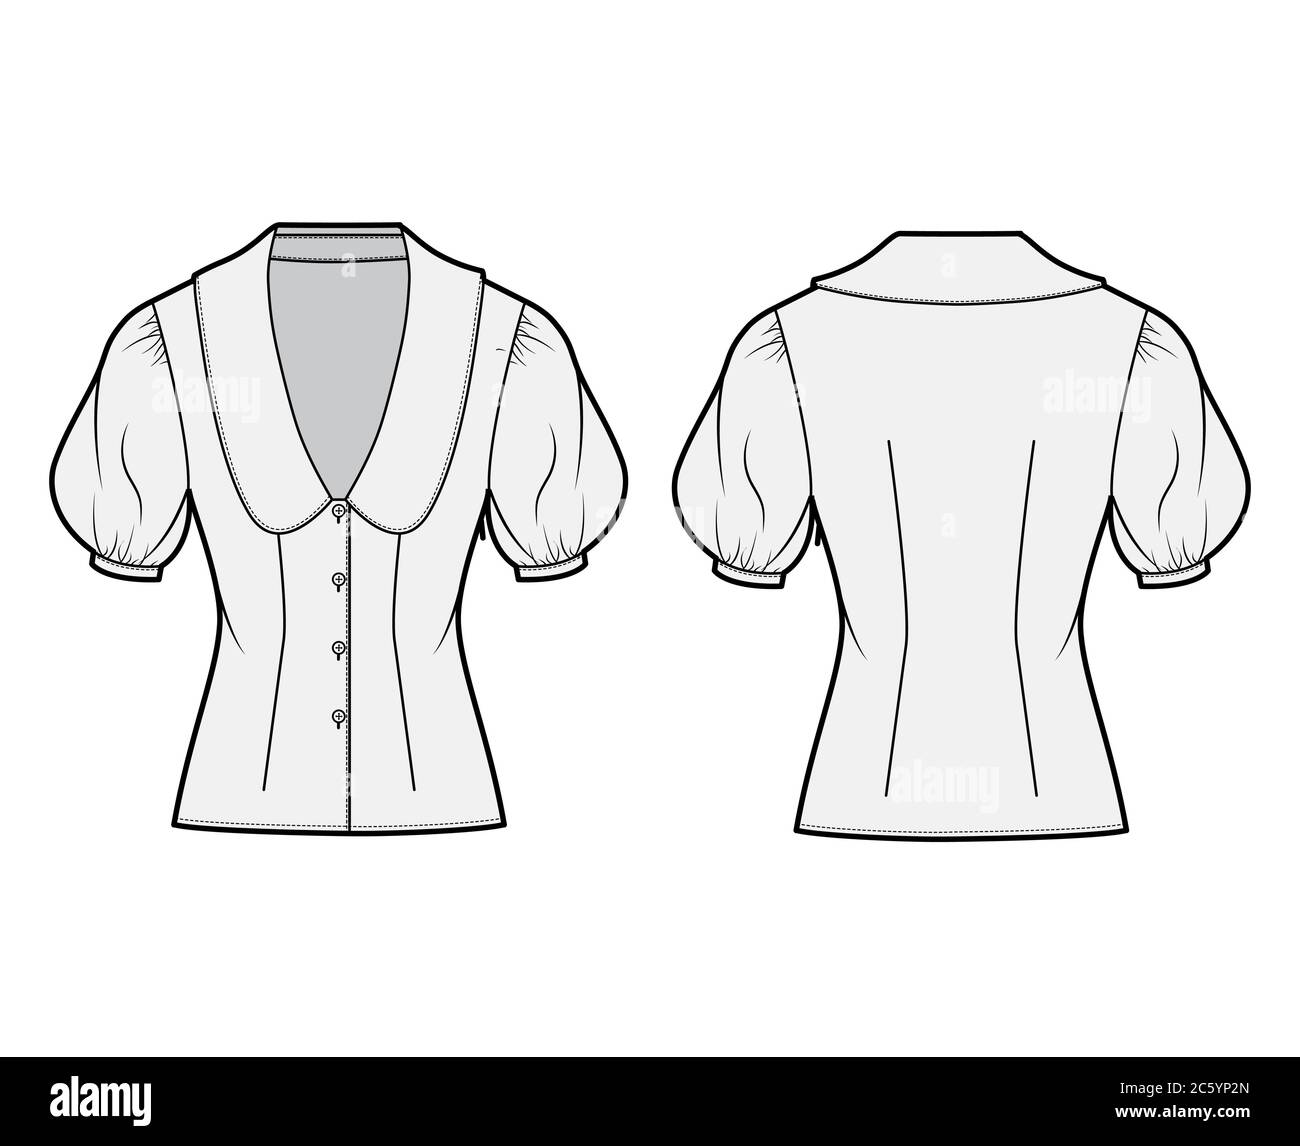 Blouse technical fashion illustration with collar framing the plunging V neck, oversized medium puffed sleeves, fitted body. Flat apparel template front back grey color. Women men unisex CAD mockup Stock Vector